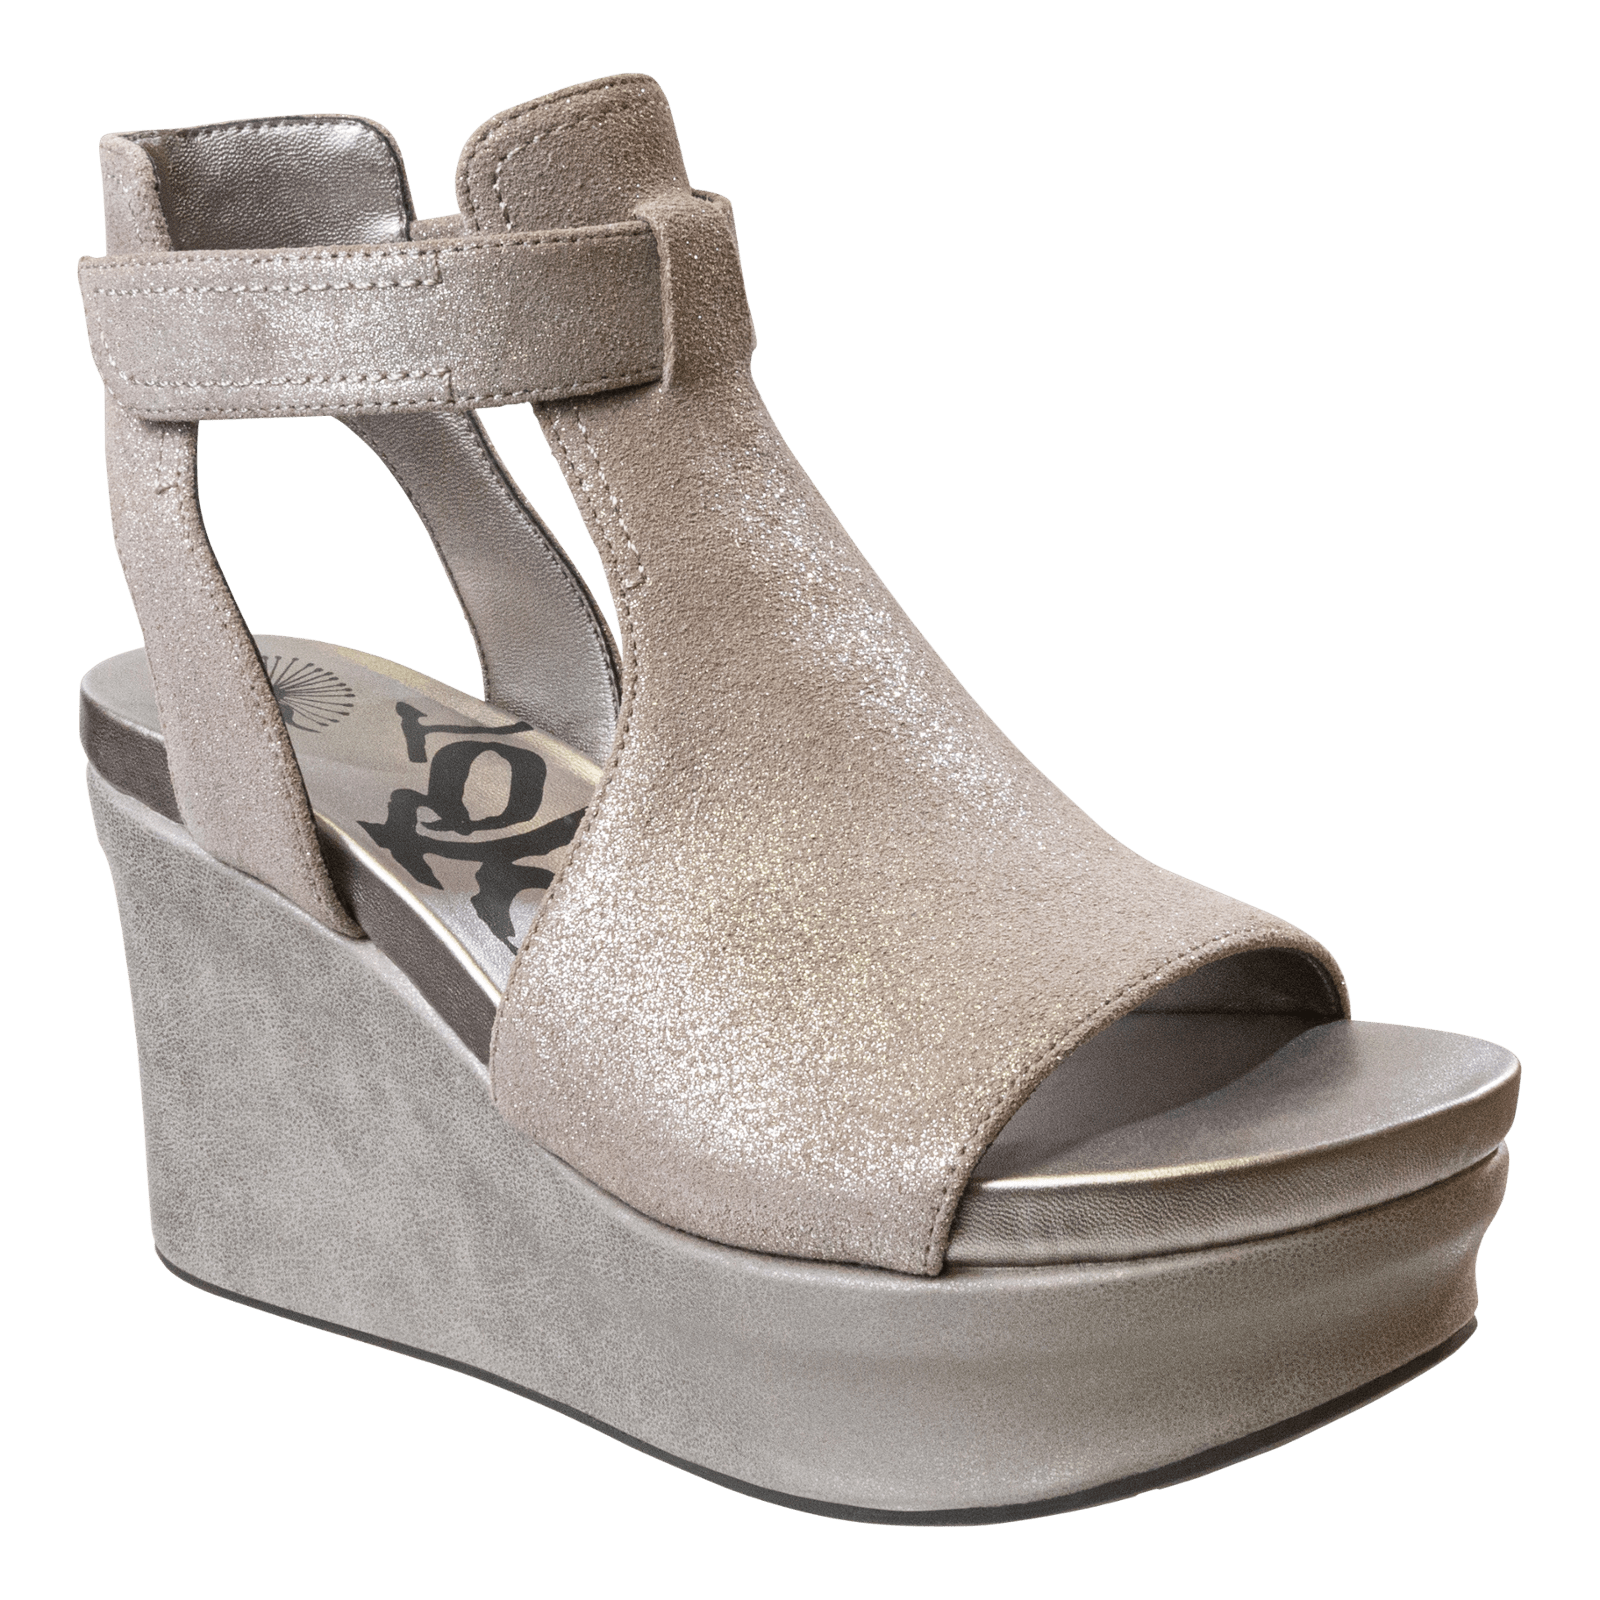 MOJO in SILVER Wedge Sandals